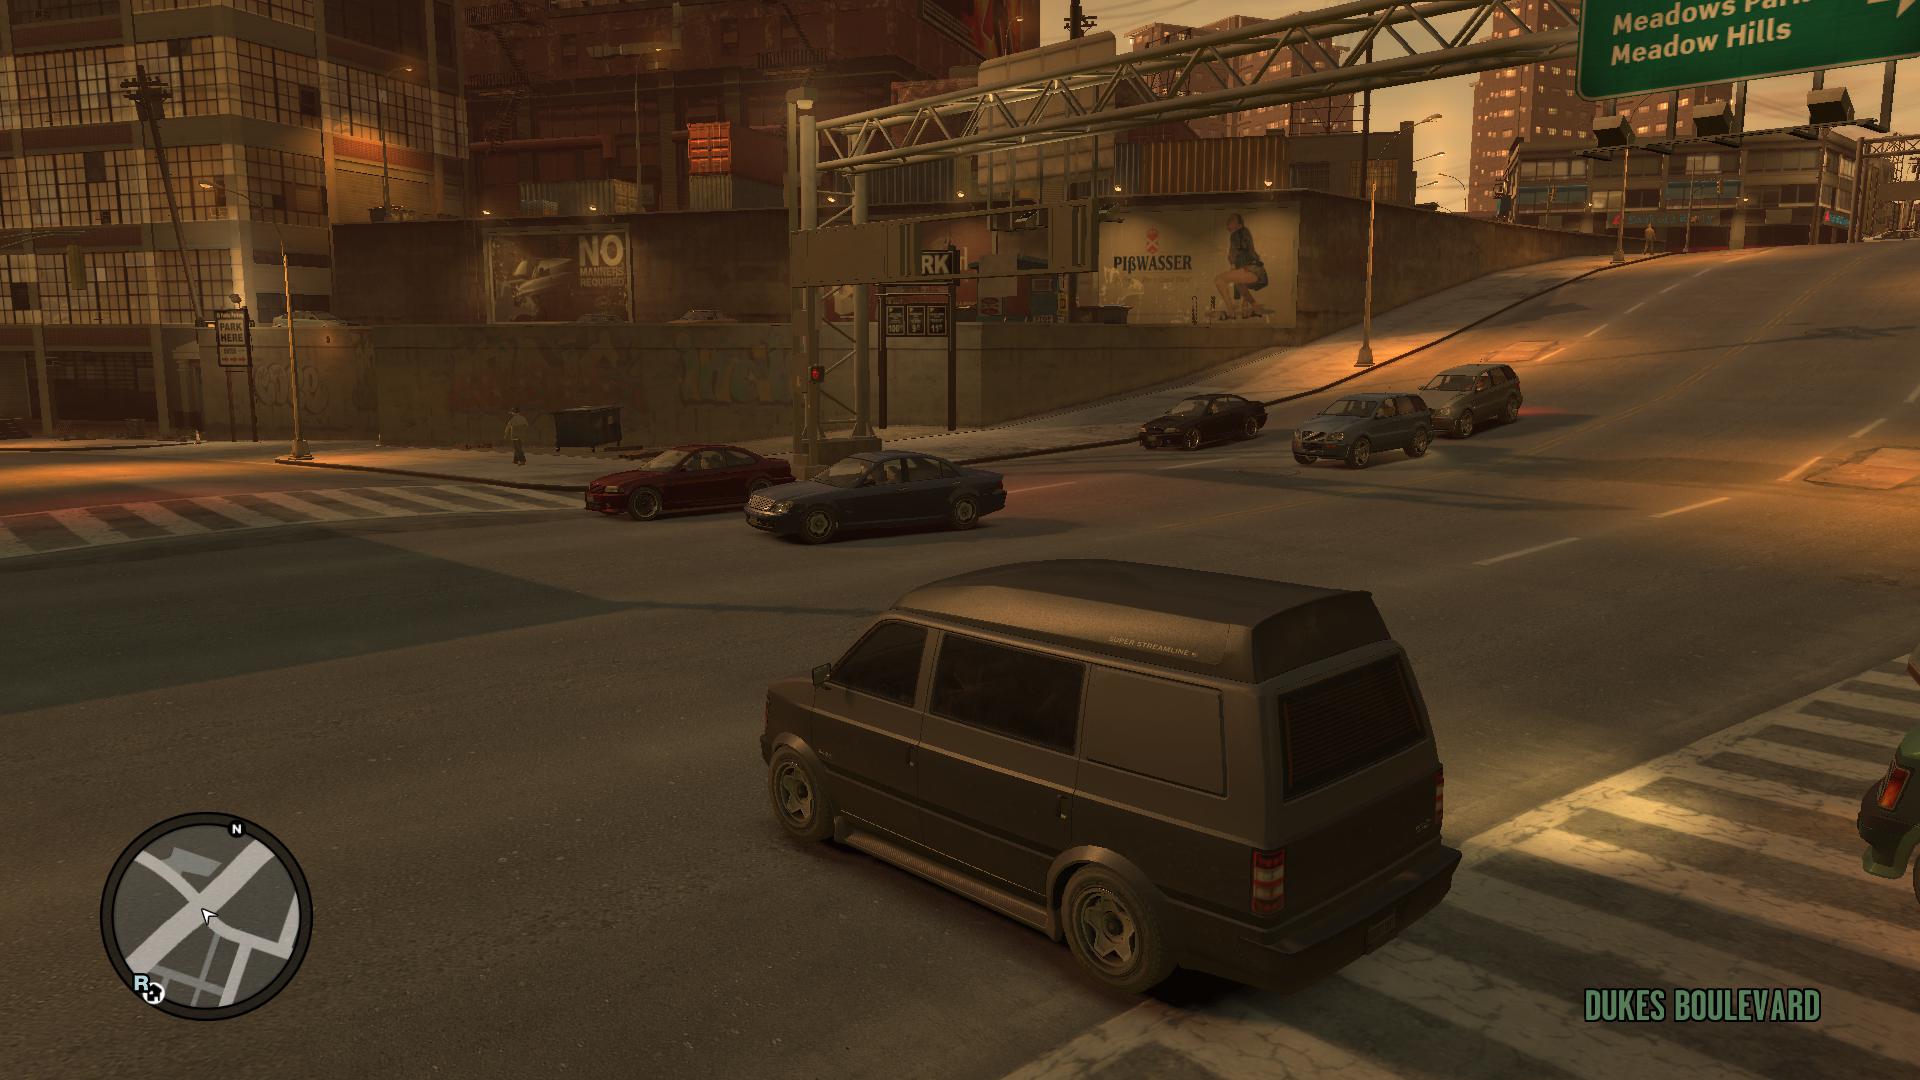 Gta 4 highly compressed at least 10mb